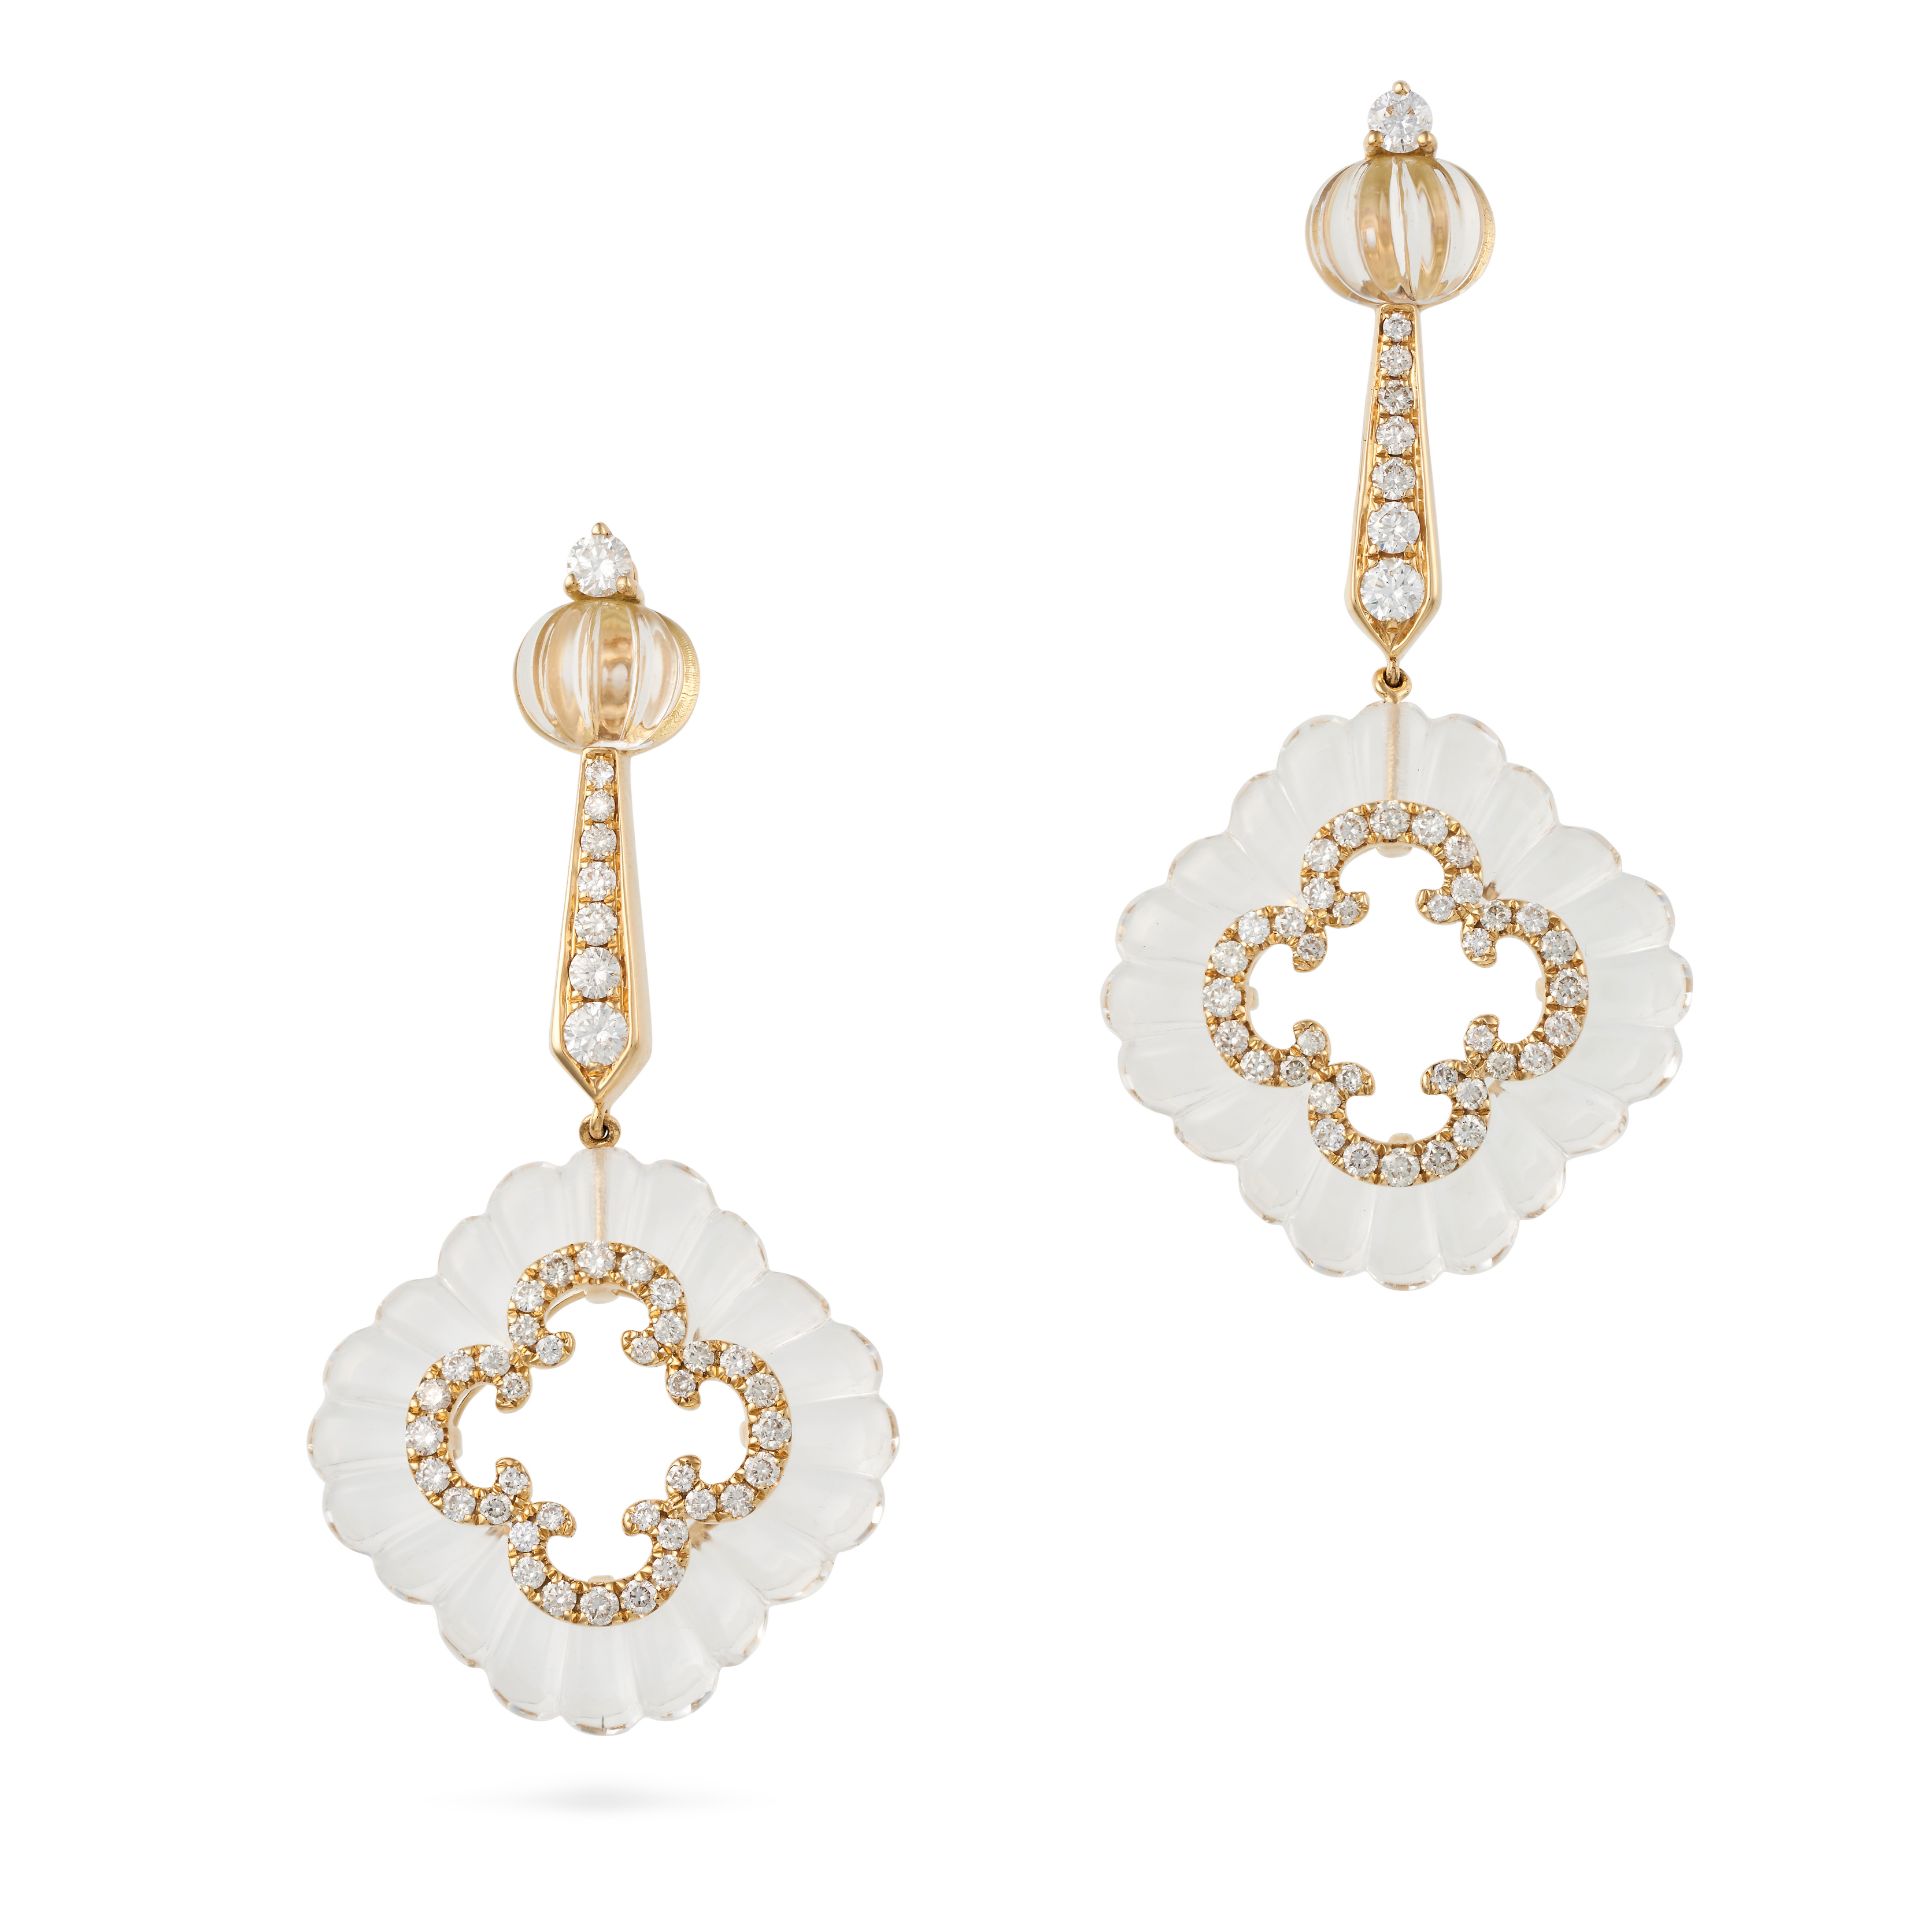 A PAIR OF ROCK CRYSTAL AND DIAMOND DROP EARRINGS each comprising a round brilliant cut diamond an...